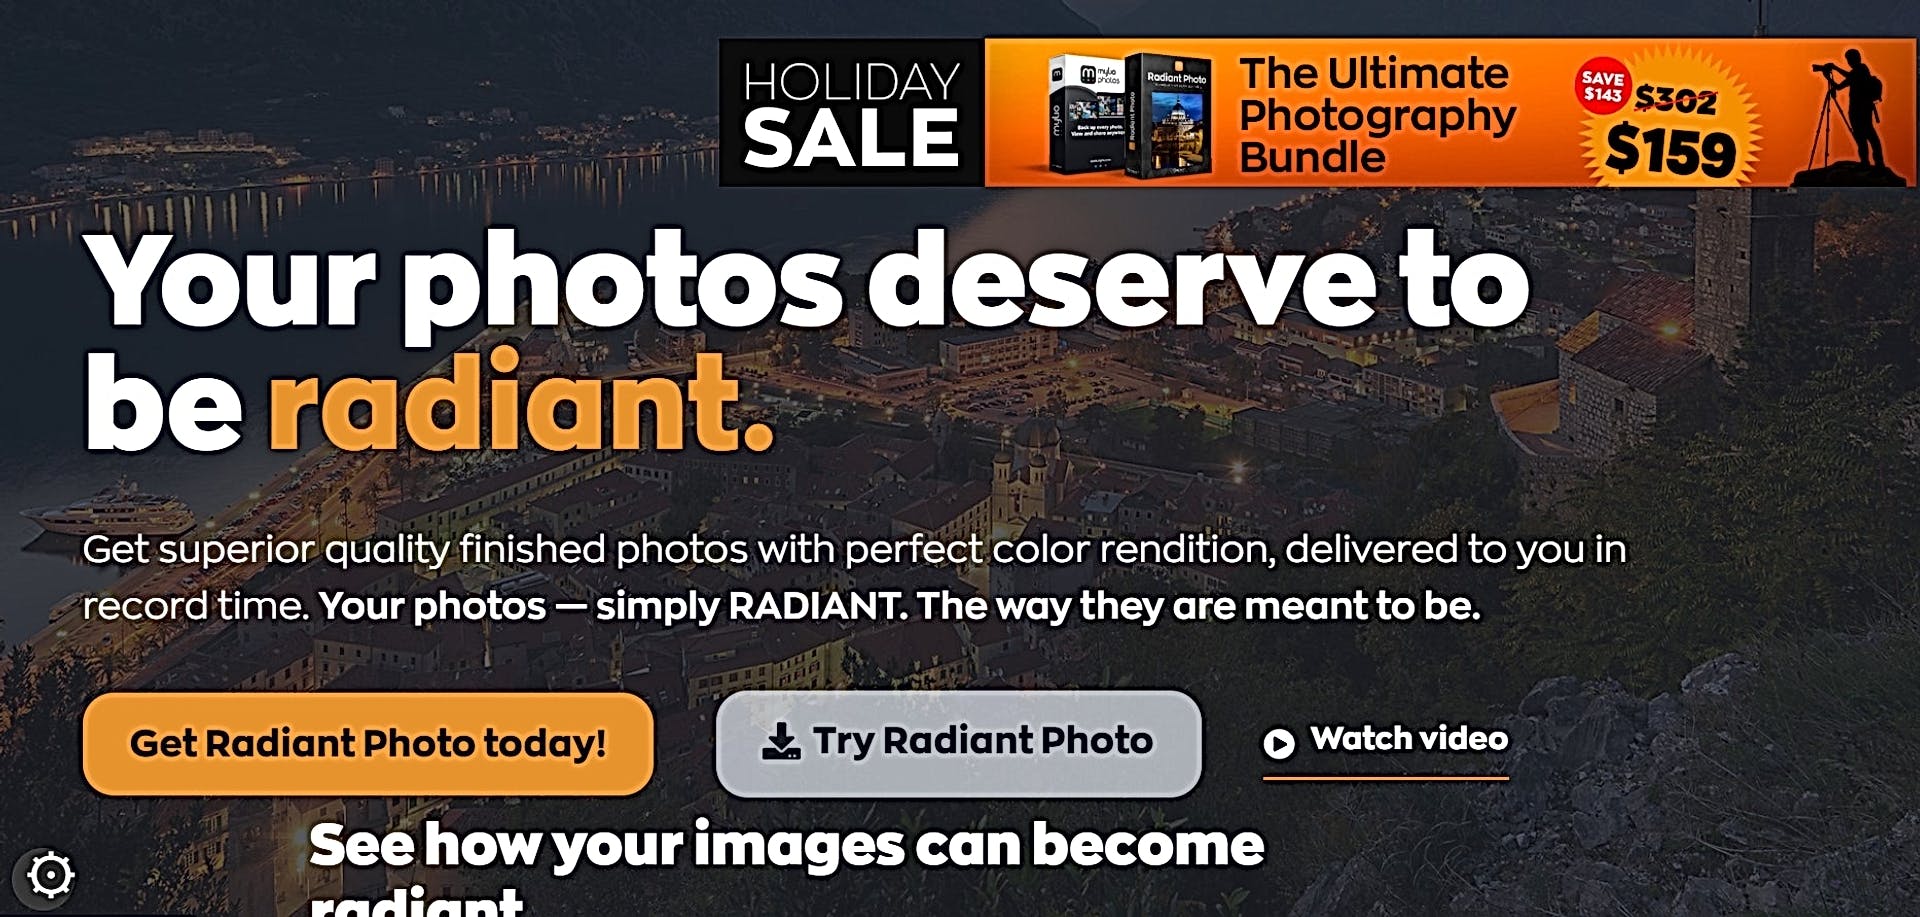 Radiant Photo featured